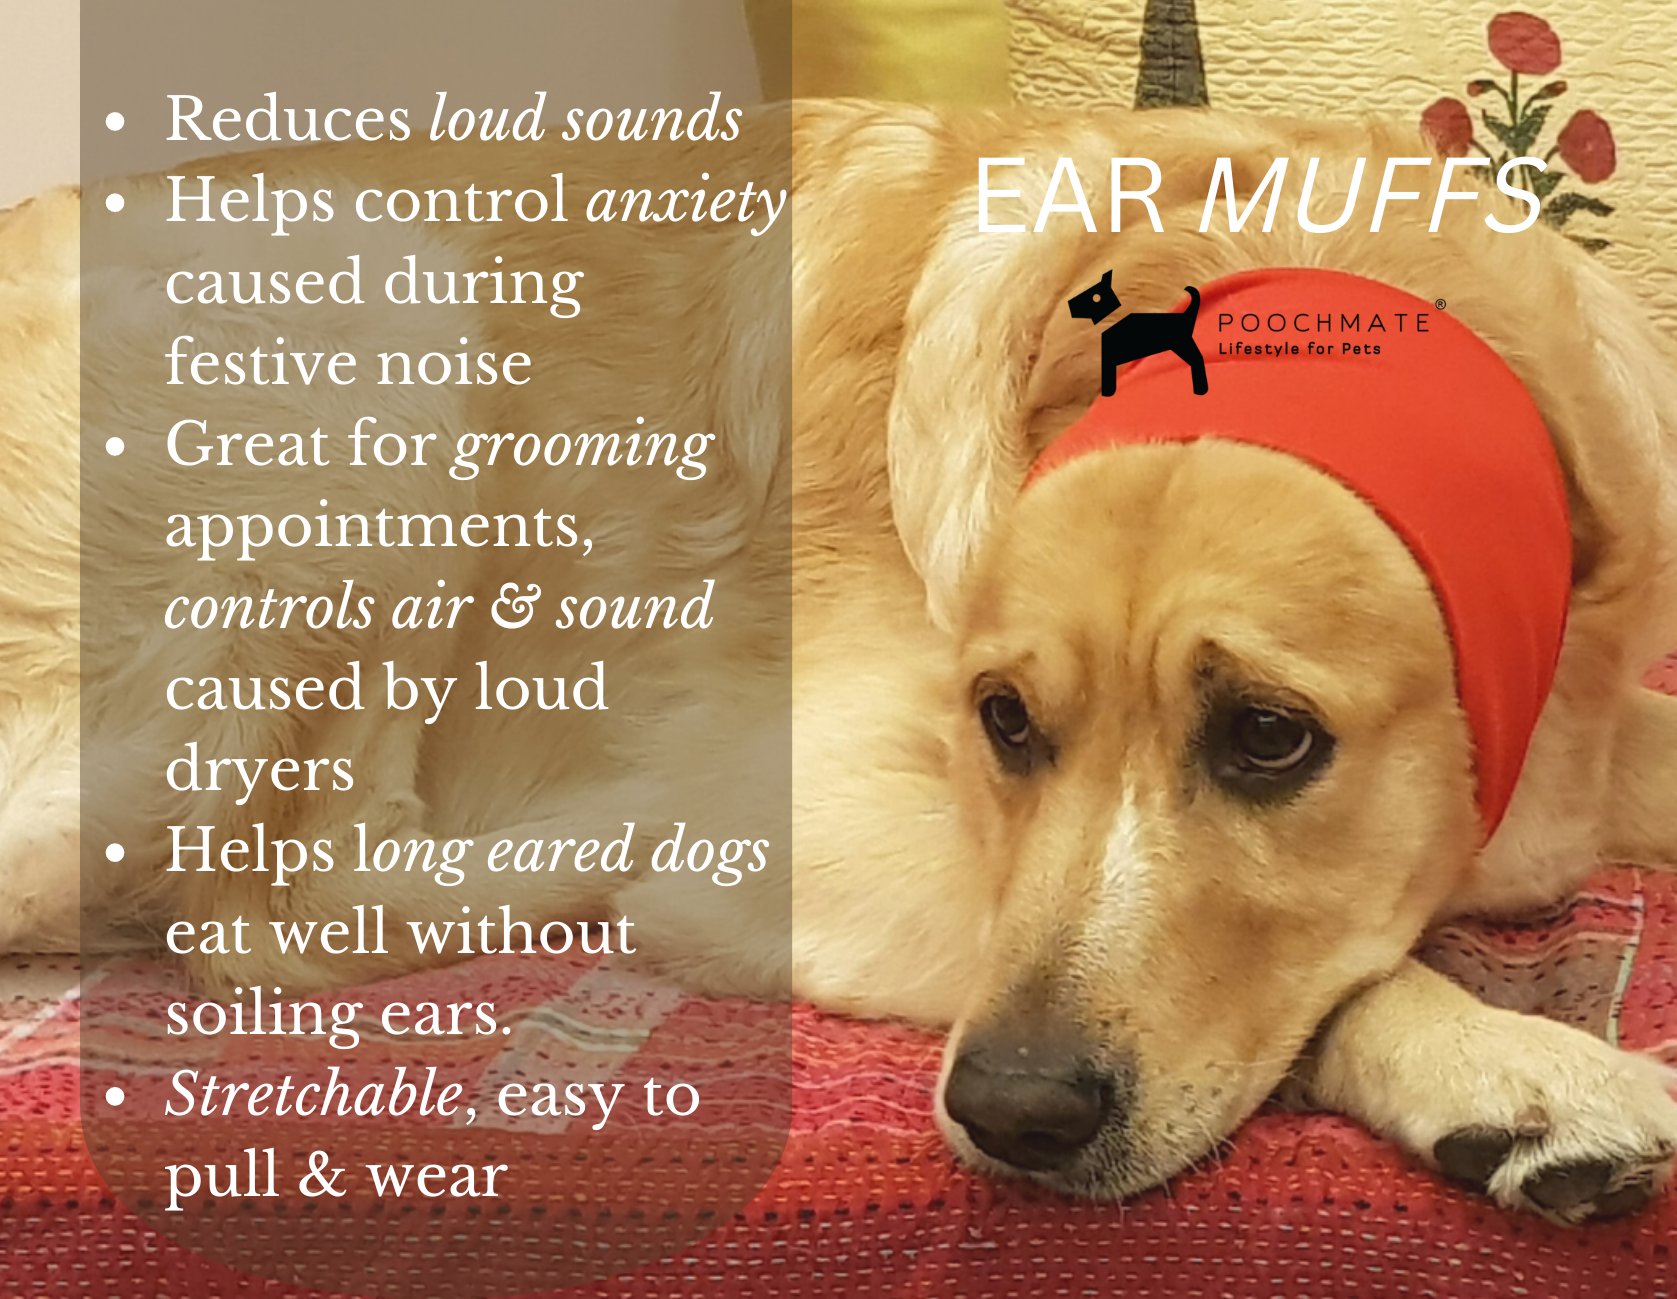 Diwali gift ideas for dogs| Ear muffs for noise cancelling for pets